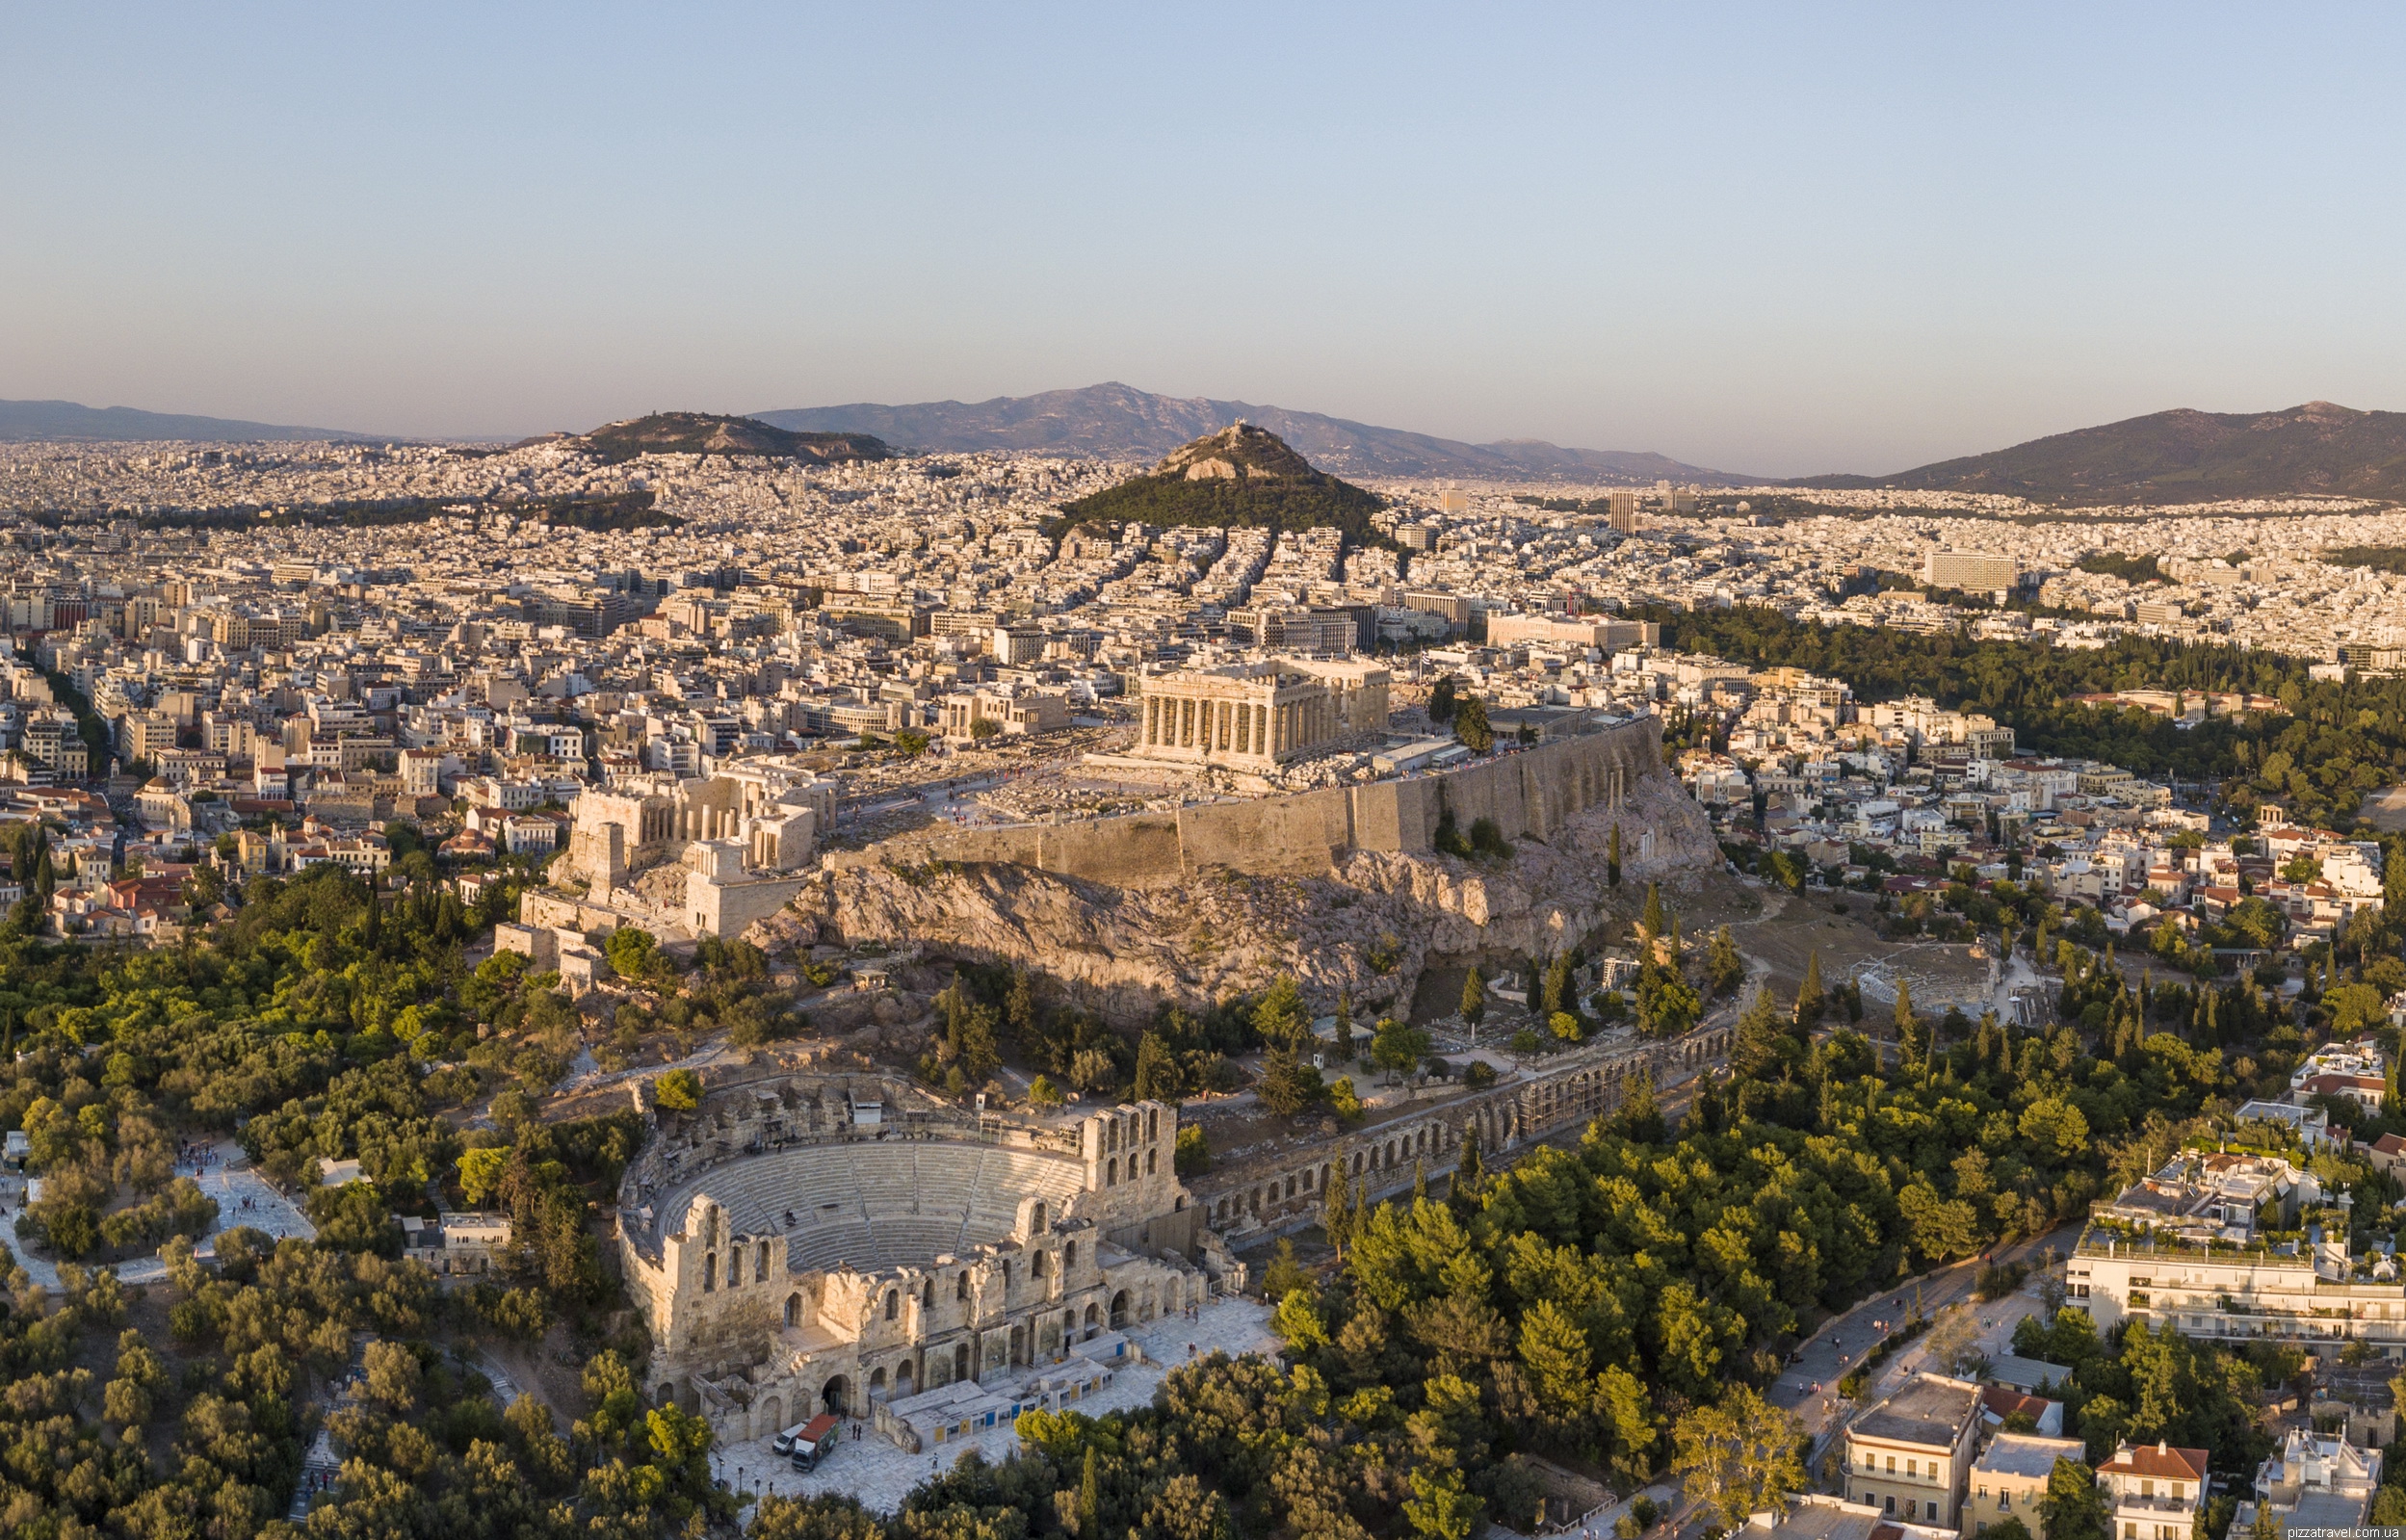 Athens - Greece - Blog about interesting places